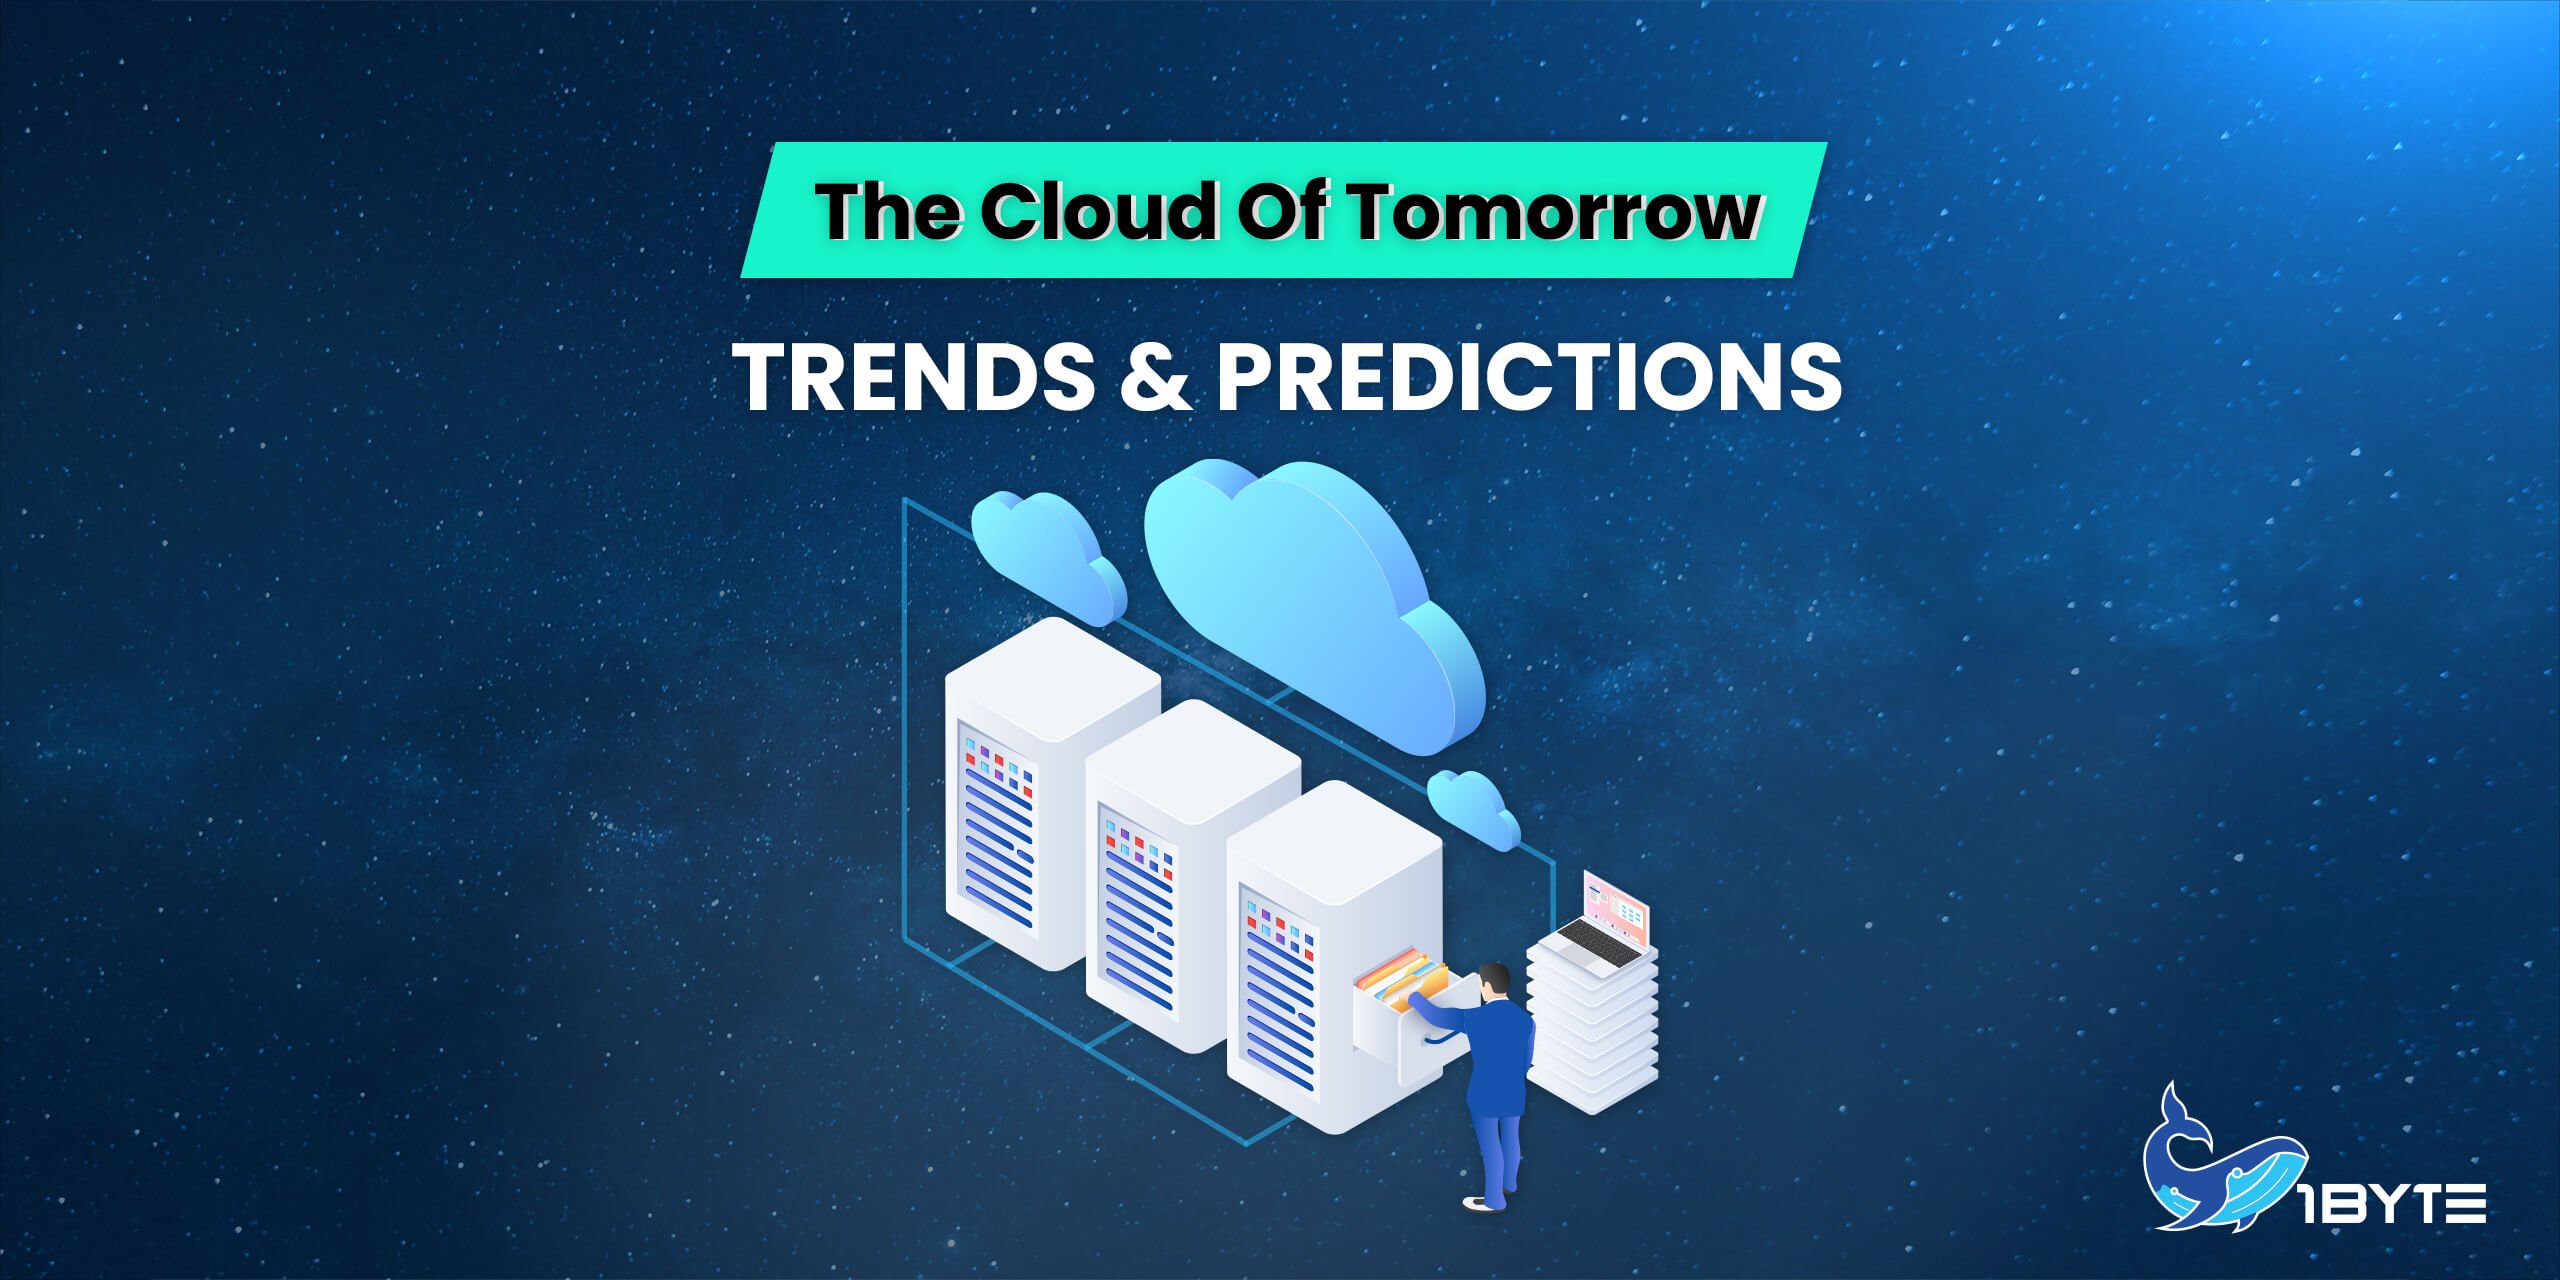 The cloud of tomorrow - Trends & Predictions